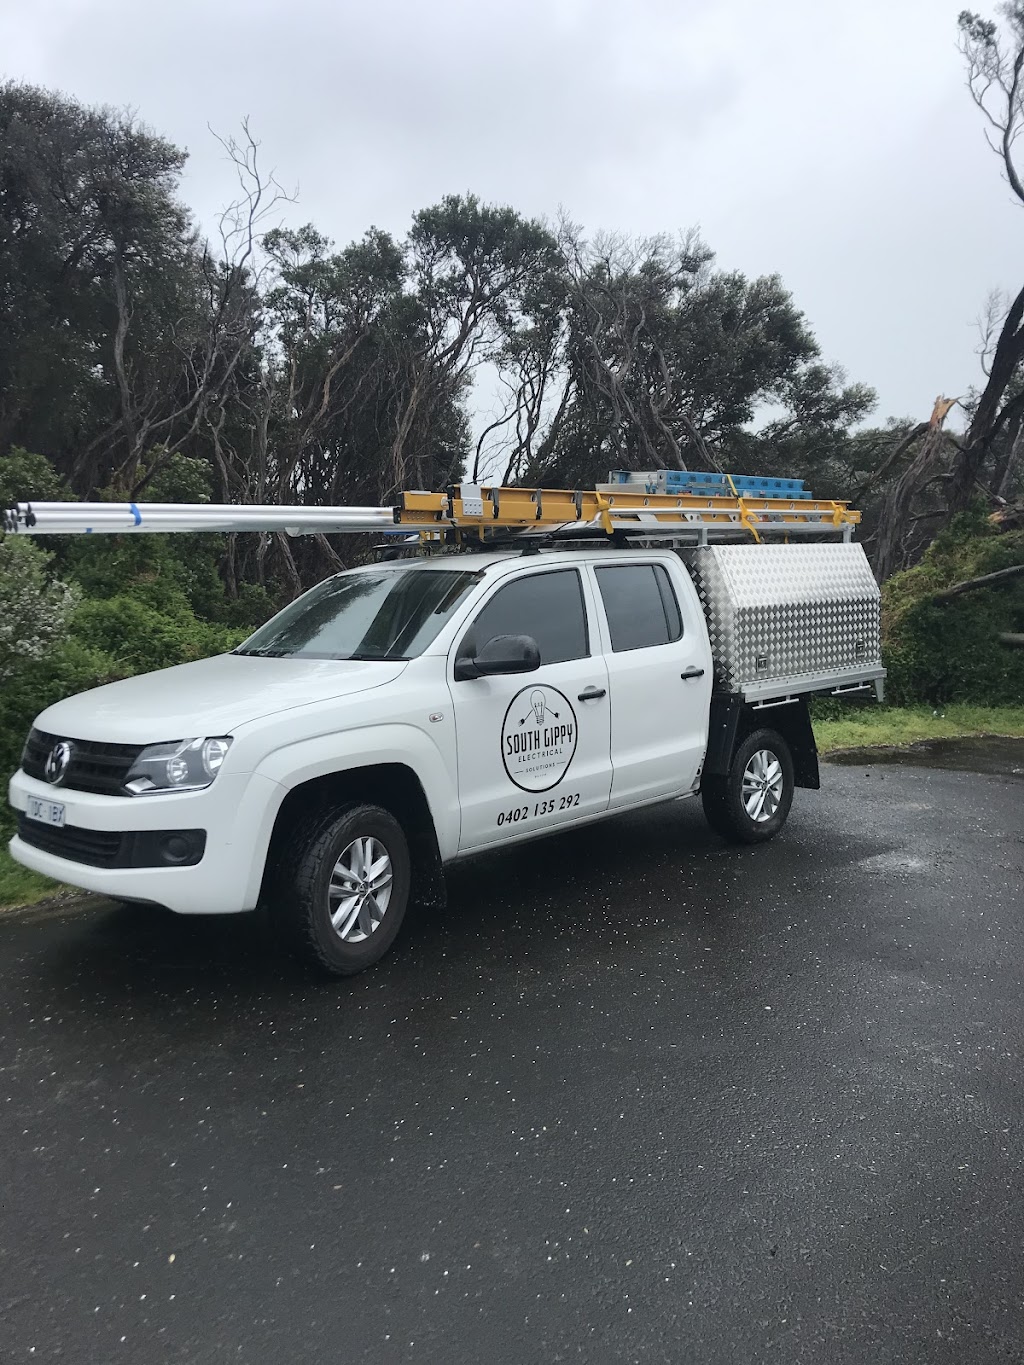 South Gippy Electrical Solutions | electrician | 30 Obrien Cct, North Wonthaggi VIC 3995, Australia | 0402135292 OR +61 402 135 292